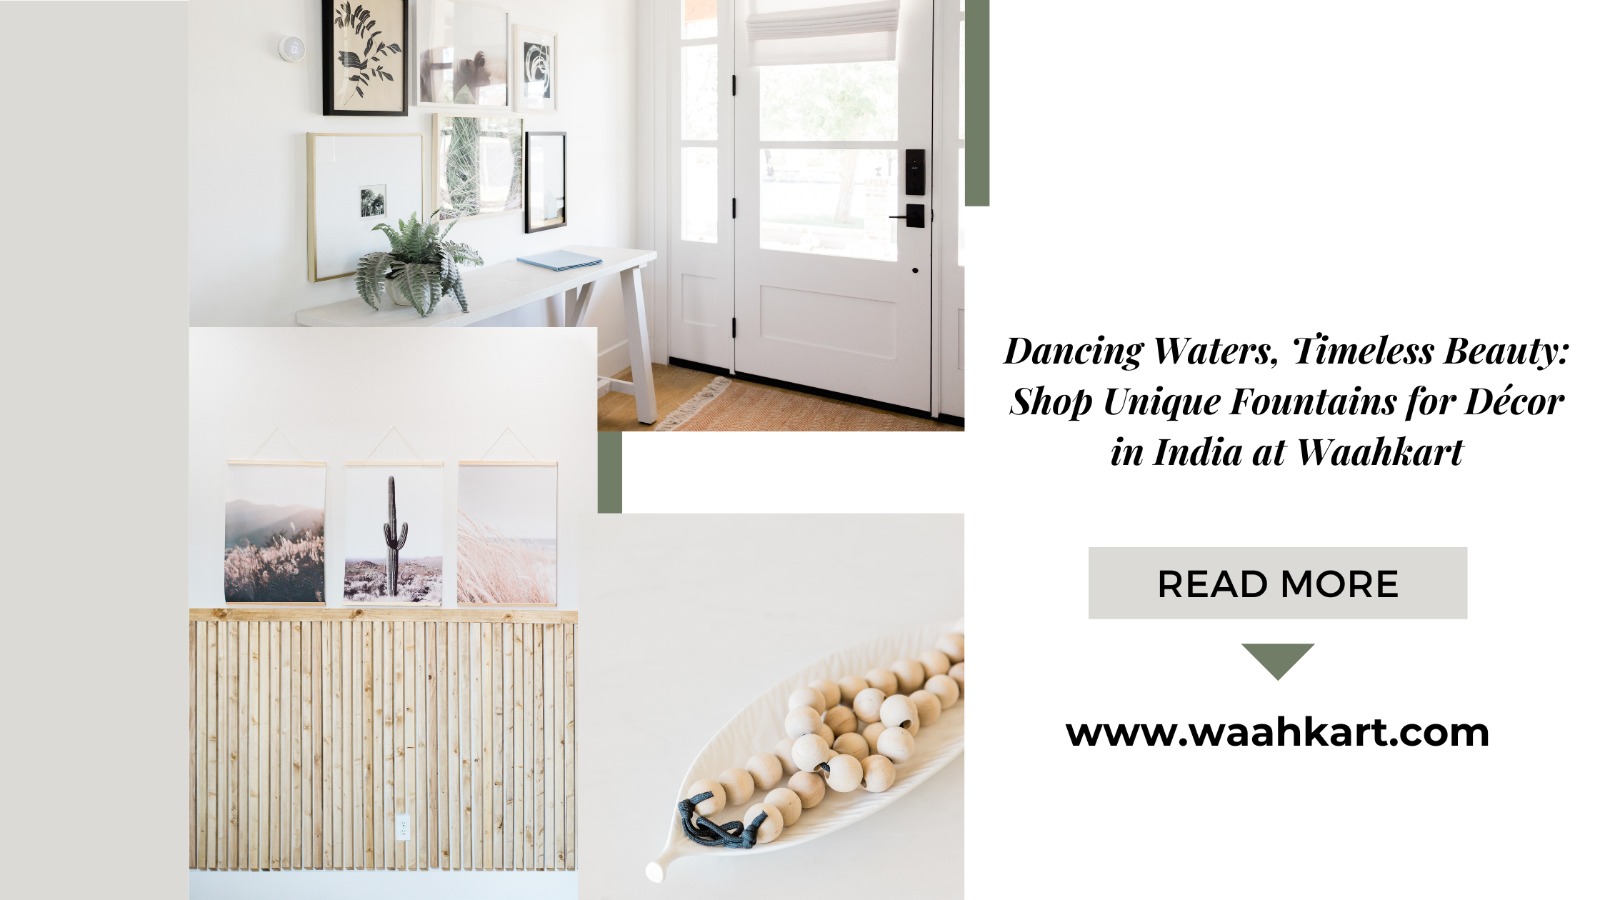 Dancing Waters, Timeless Beauty: Shop Unique Fountains for Décor in India at Waahkart